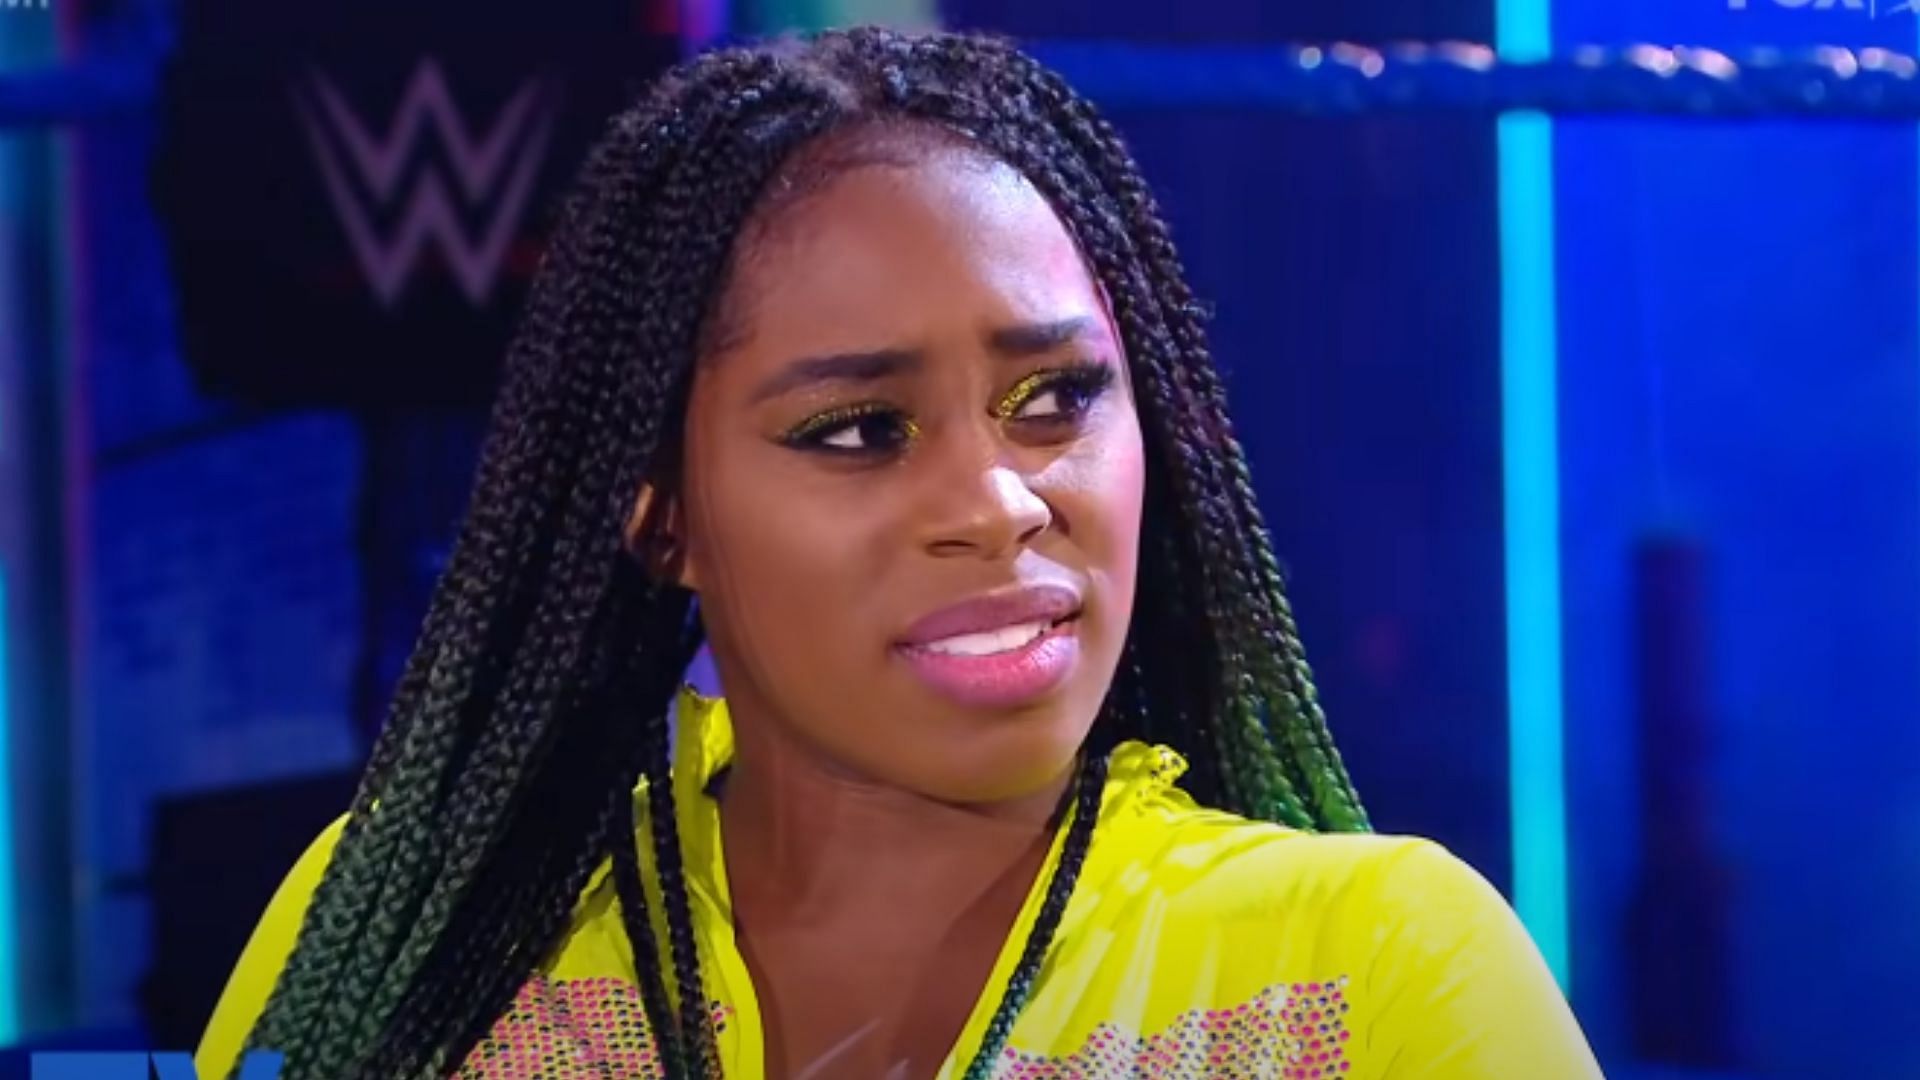 Naomi has been suspended by WWE.